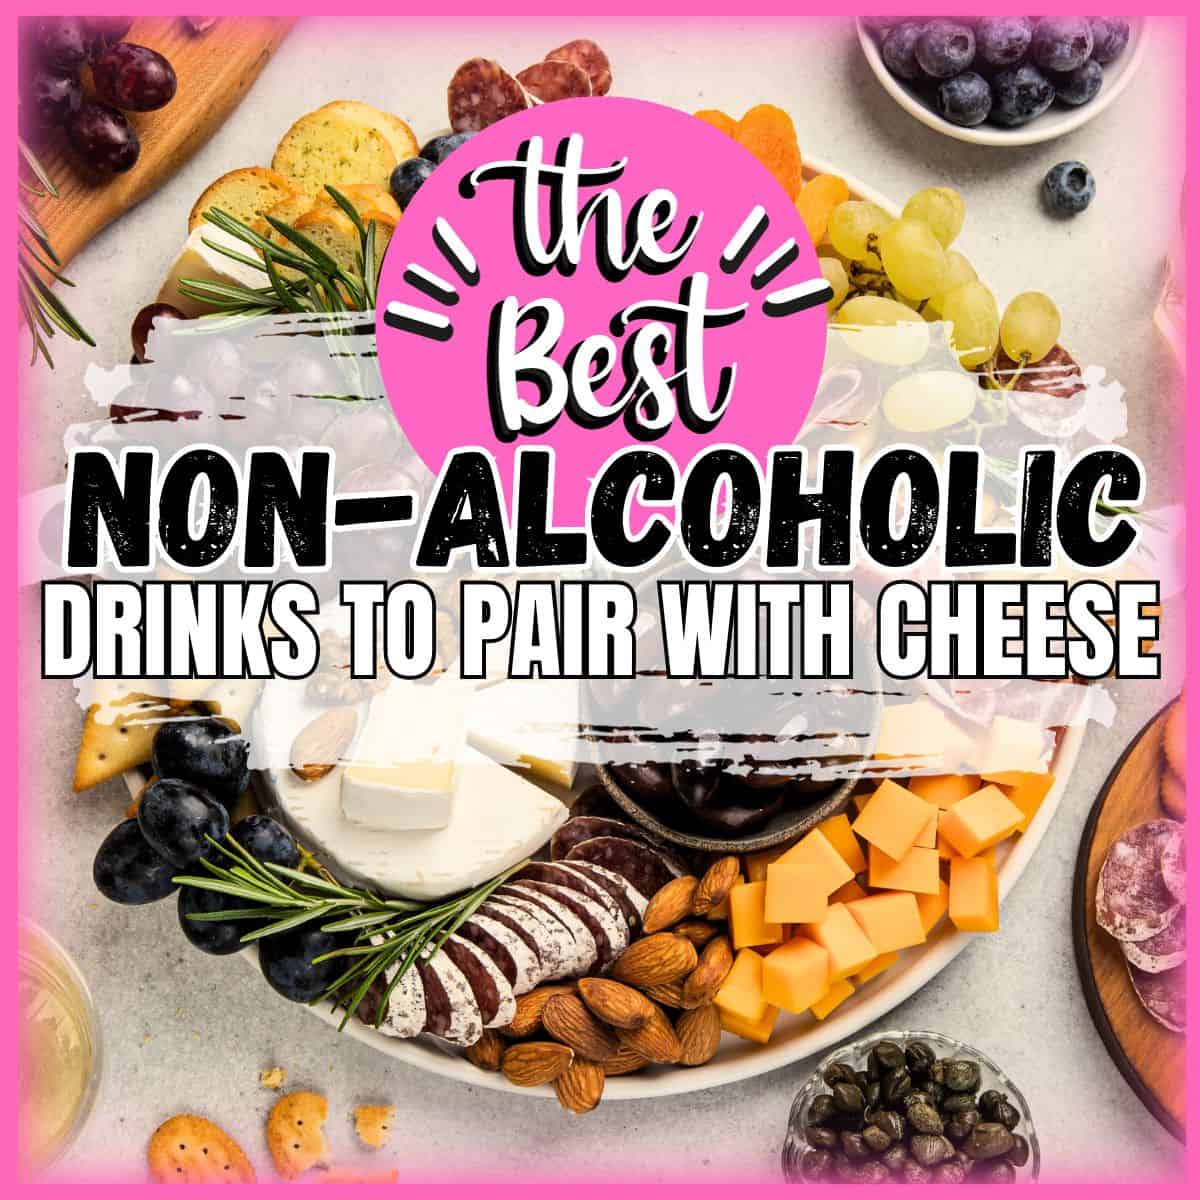 Image titled: the best non-alcoholid drinks to pair with cheese.